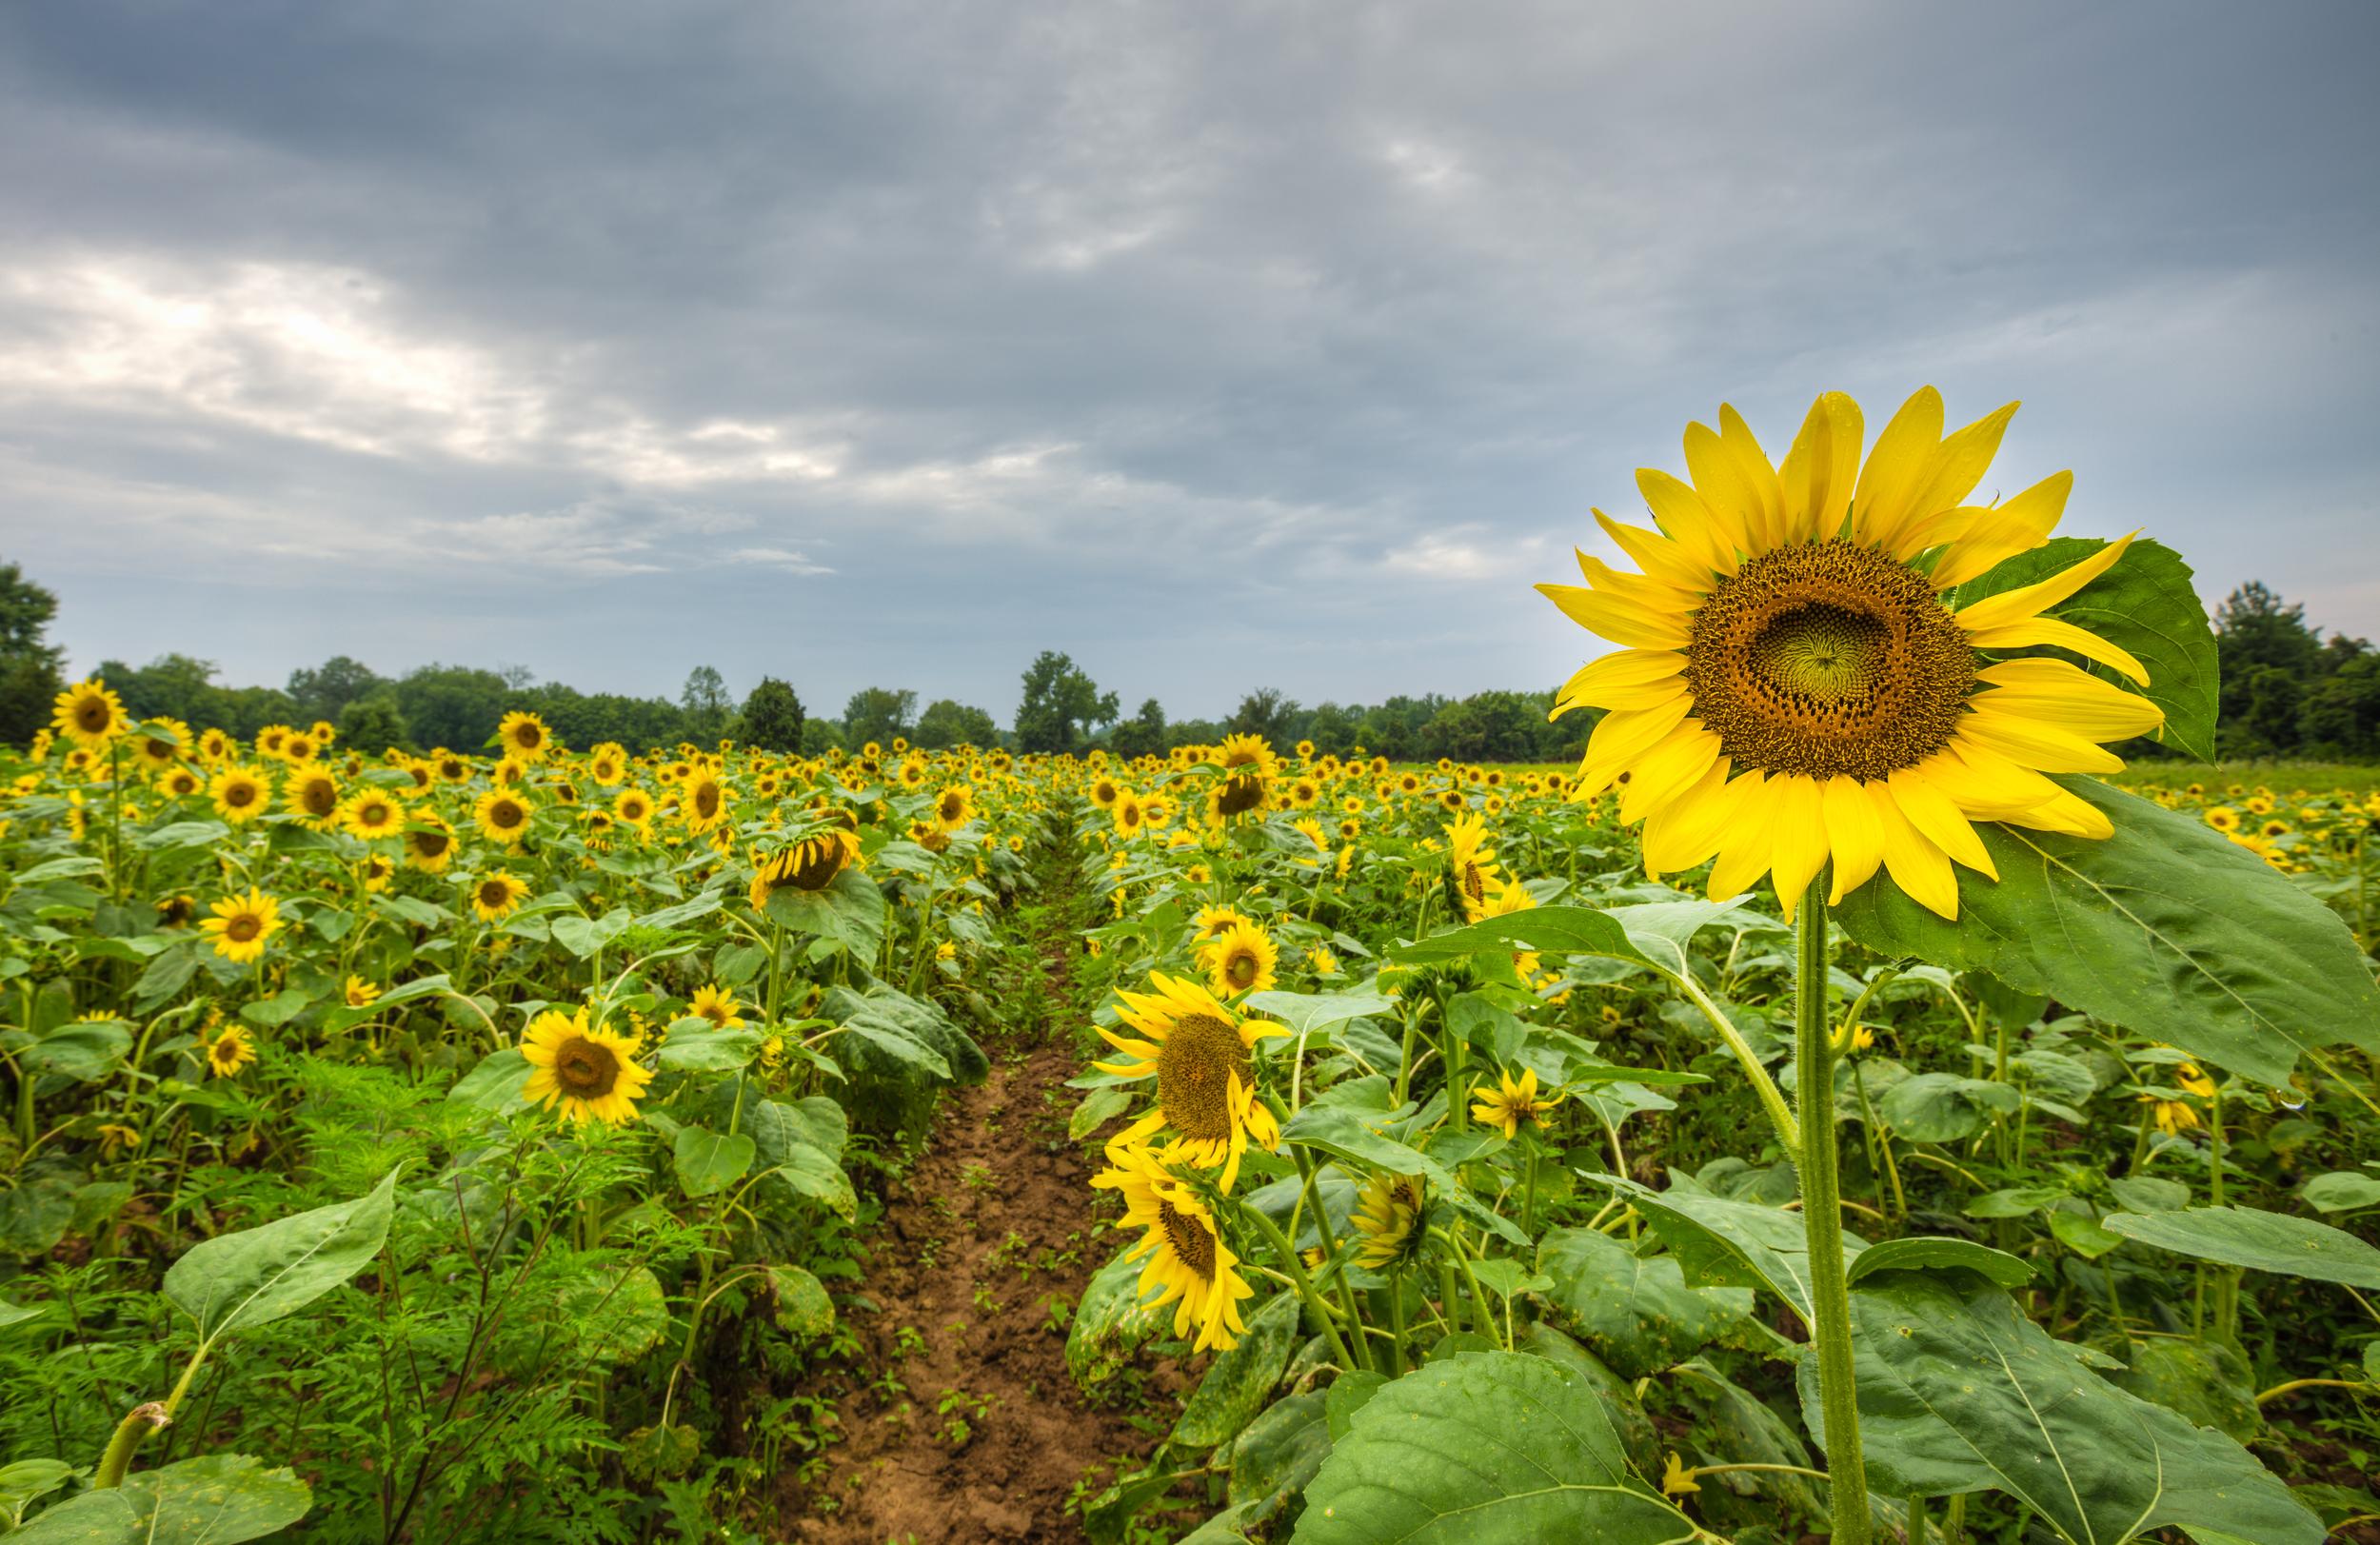 Sunflower Fields at McKee-Beshers in Maryland [Photo Guide]